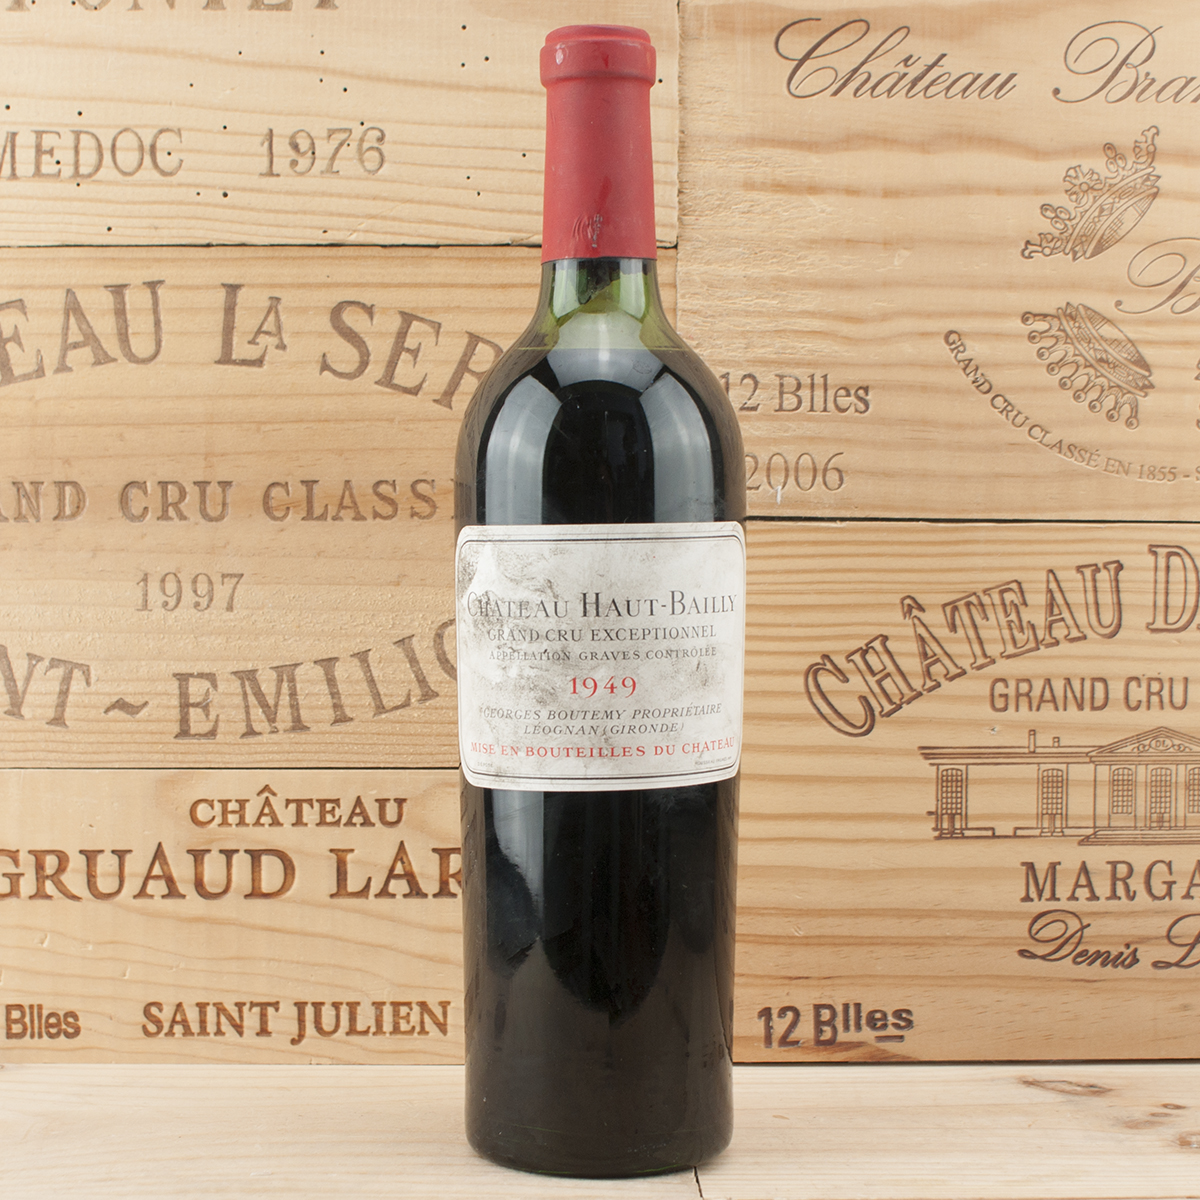 1949 Chateau Haut Bailly